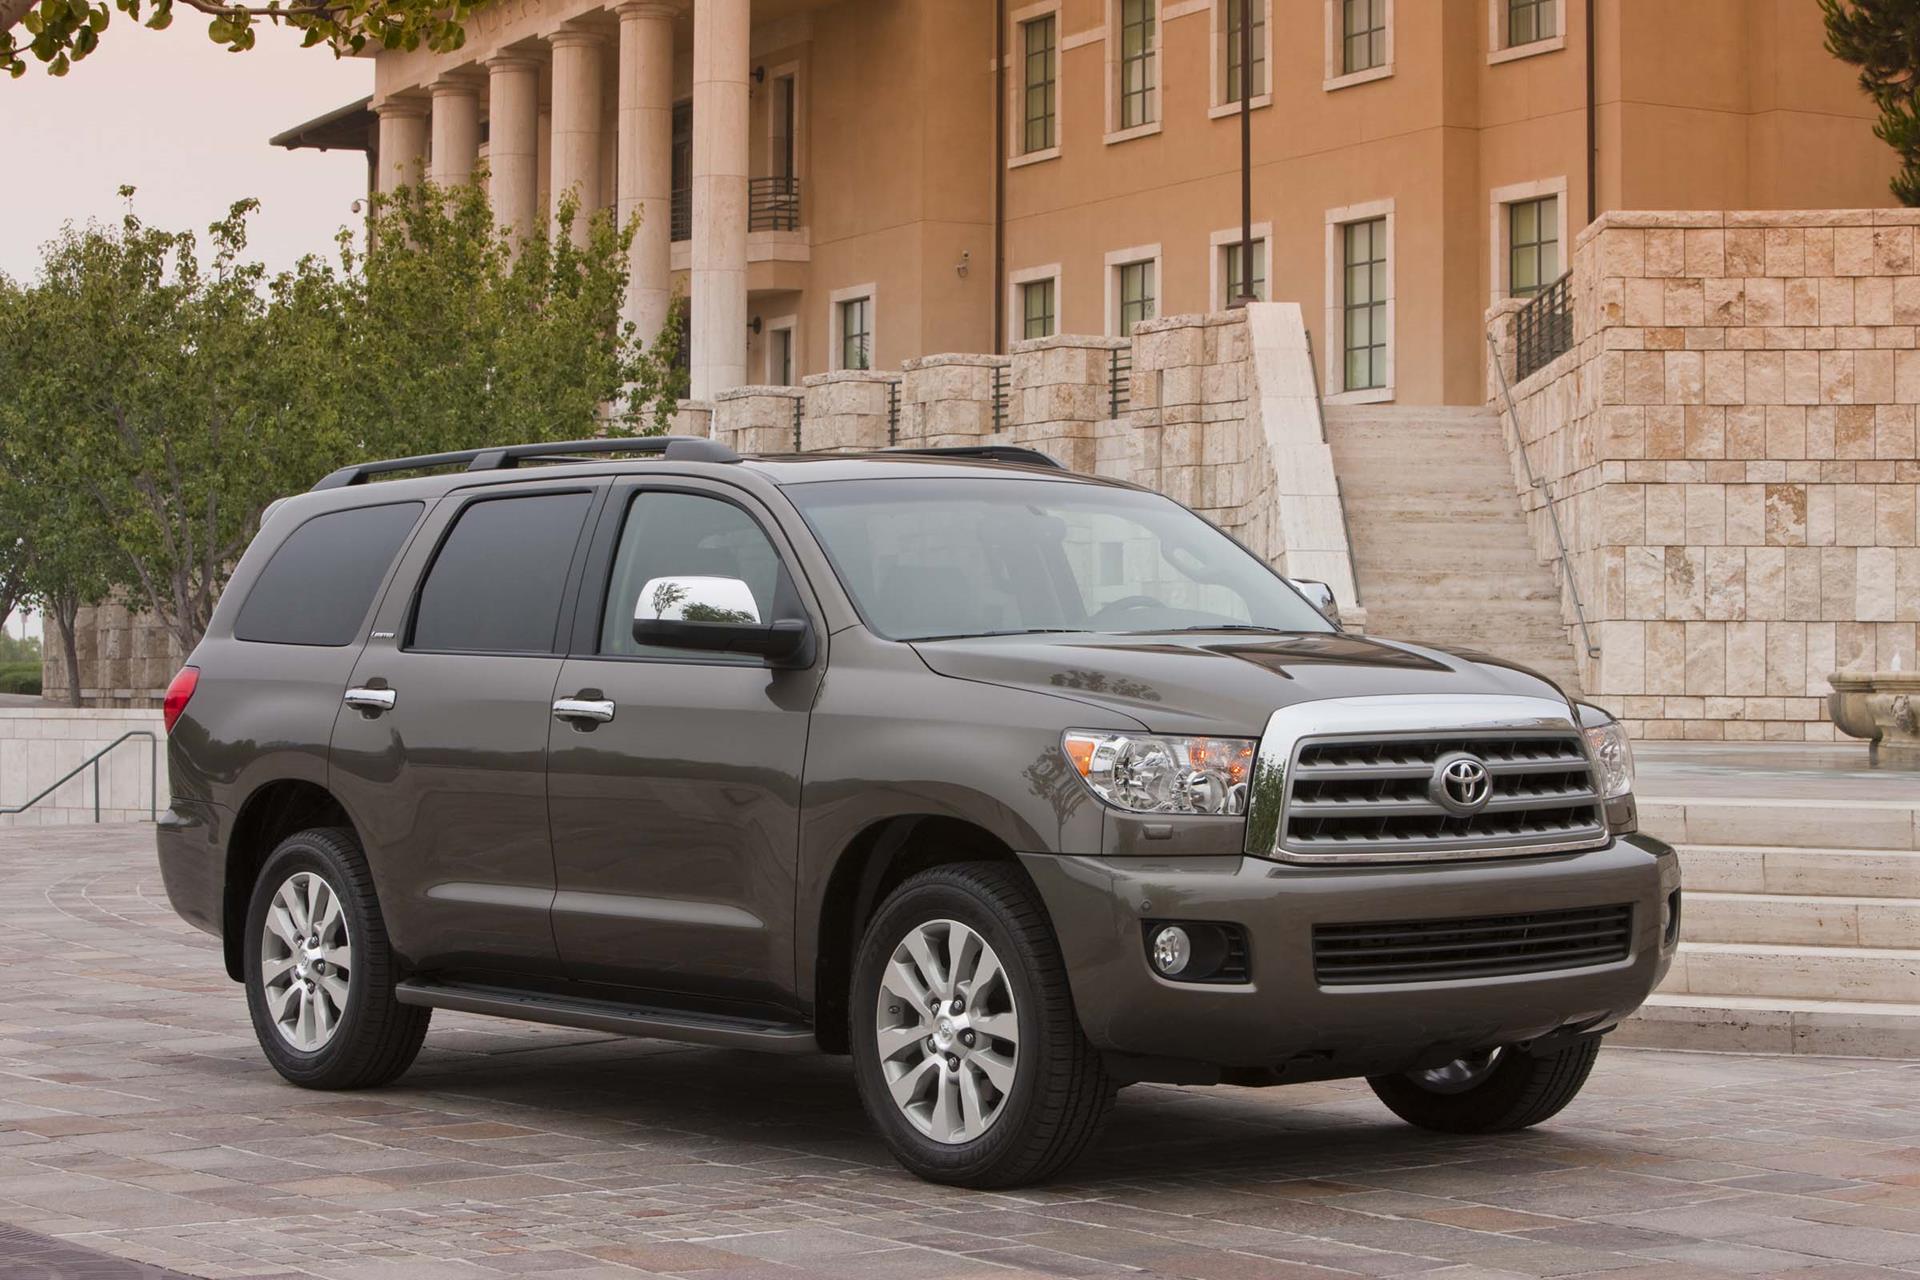 2016 Toyota Sequoia Technical Specifications and data. Engine ...